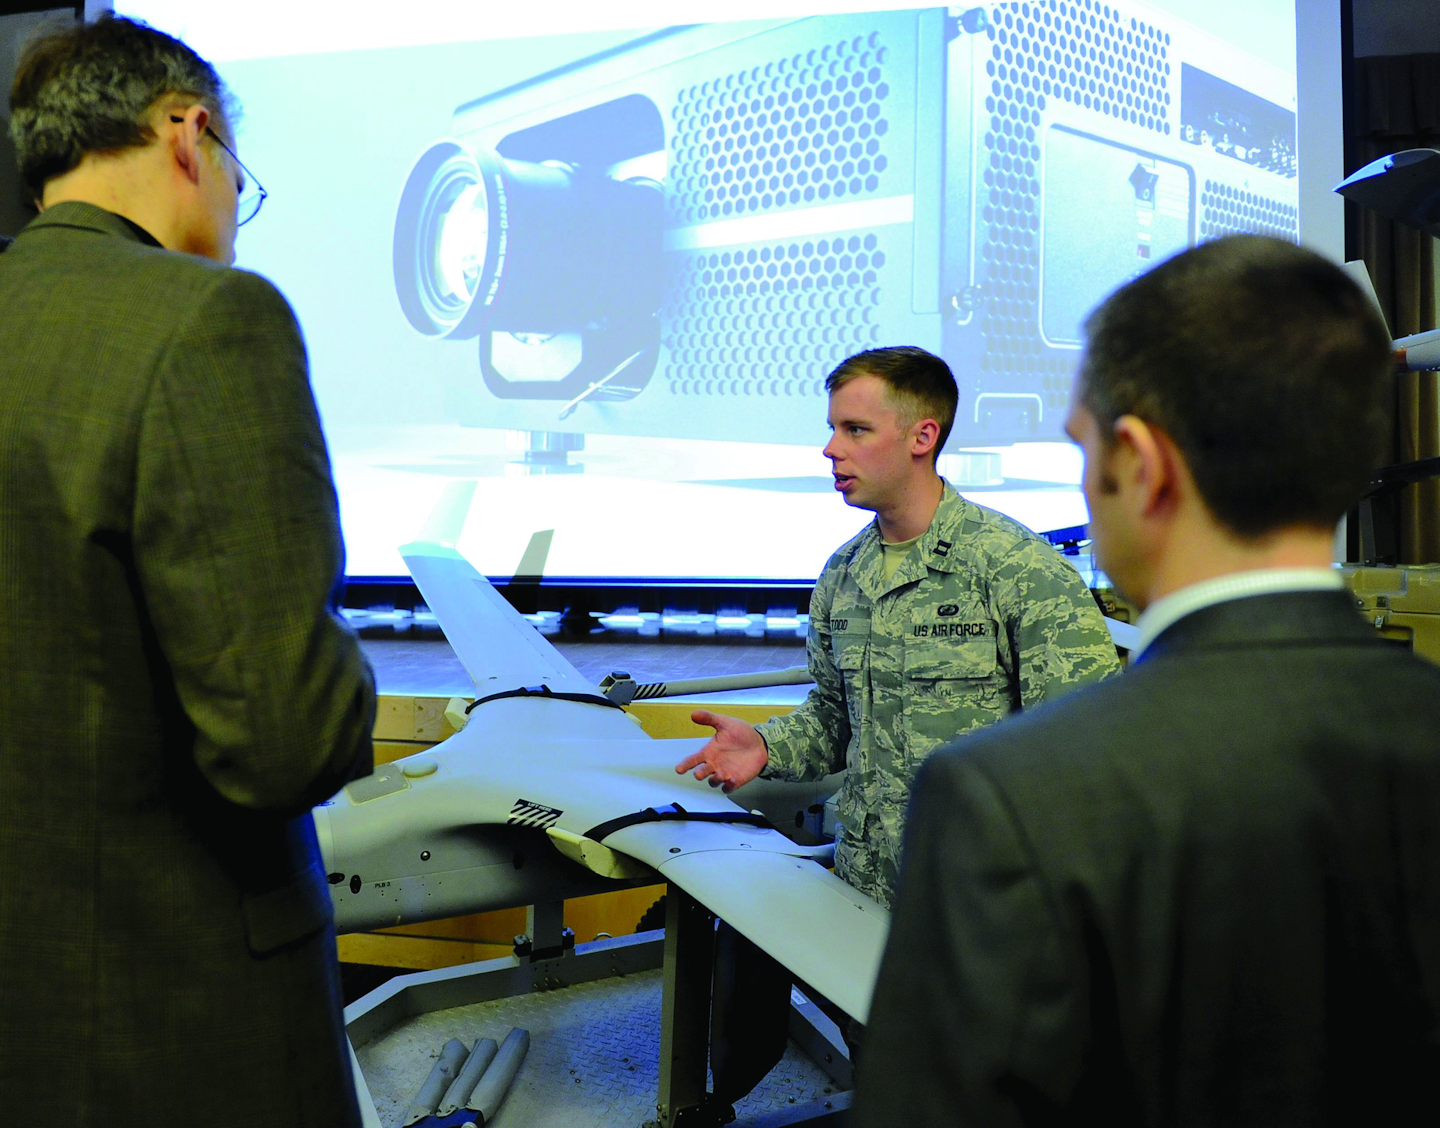 Capt. Lee M. Todd, an engineer at the Air Force Research Laboratory, briefs media during the release of the Small Unmanned Aircraft System Flight Plan at the Pentagon Conference Center.